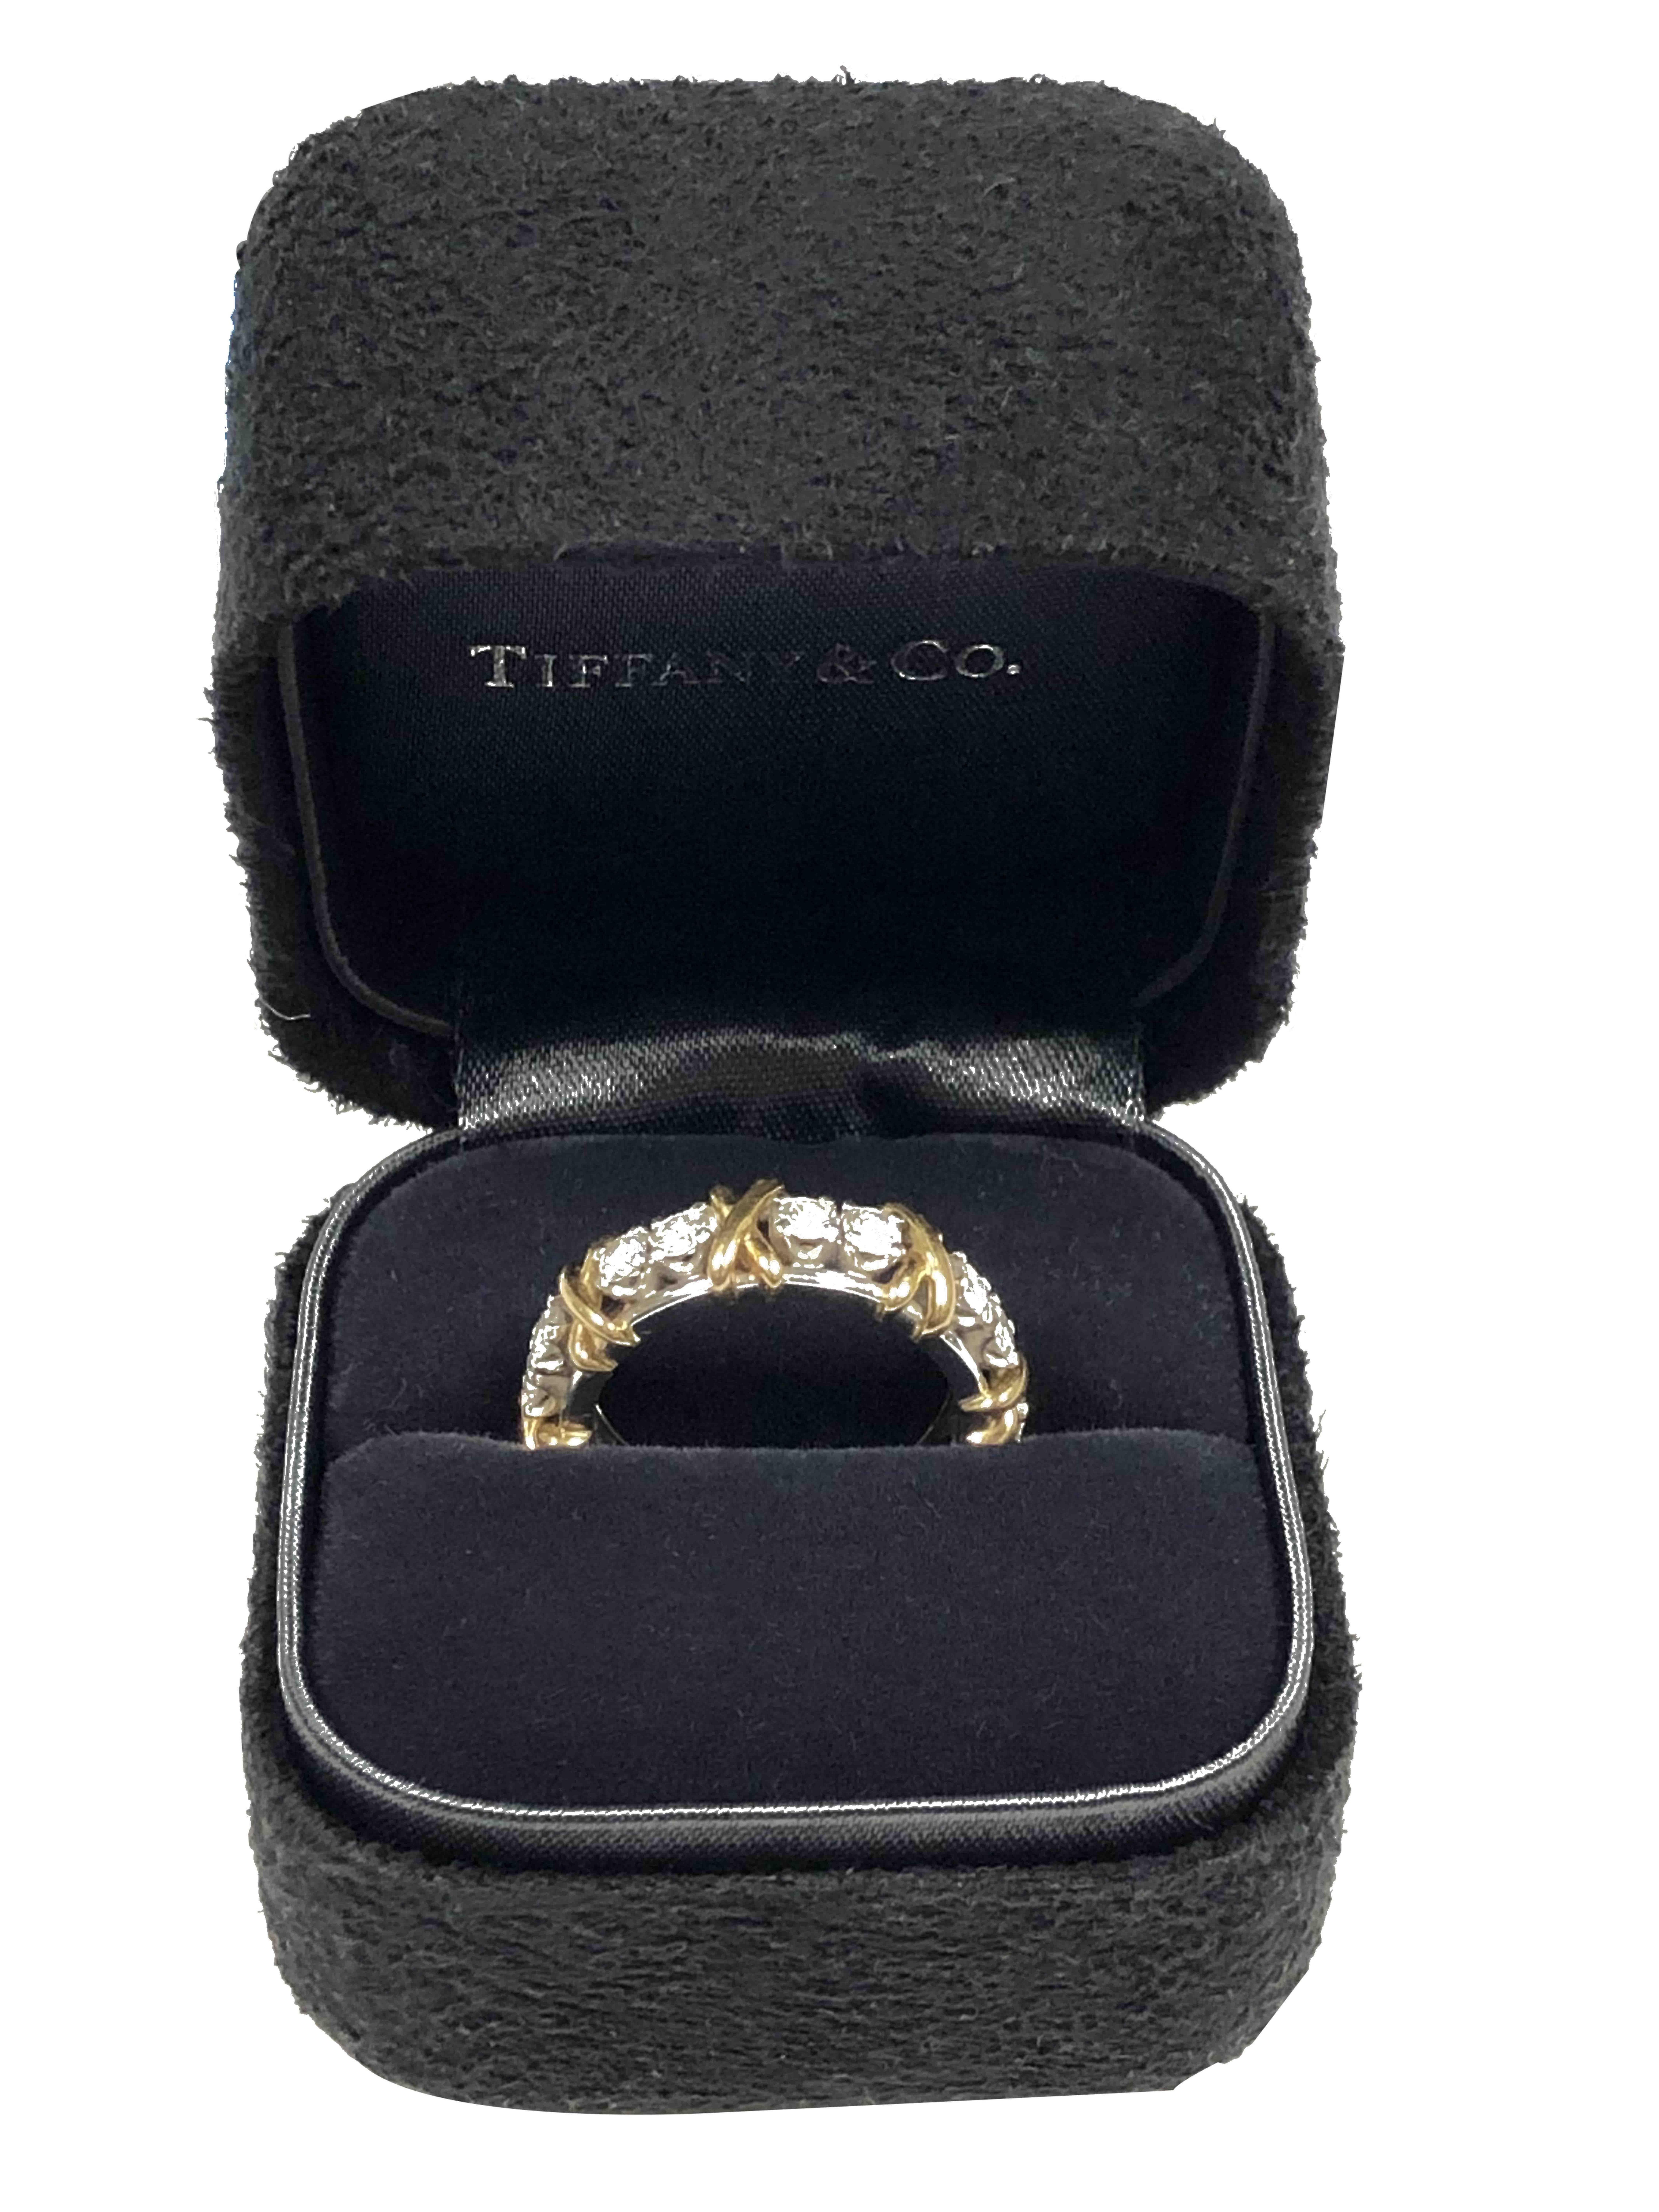 Women's or Men's Tiffany & Co. Schlumberger Platinum Gold and Diamond Classic X Band Ring